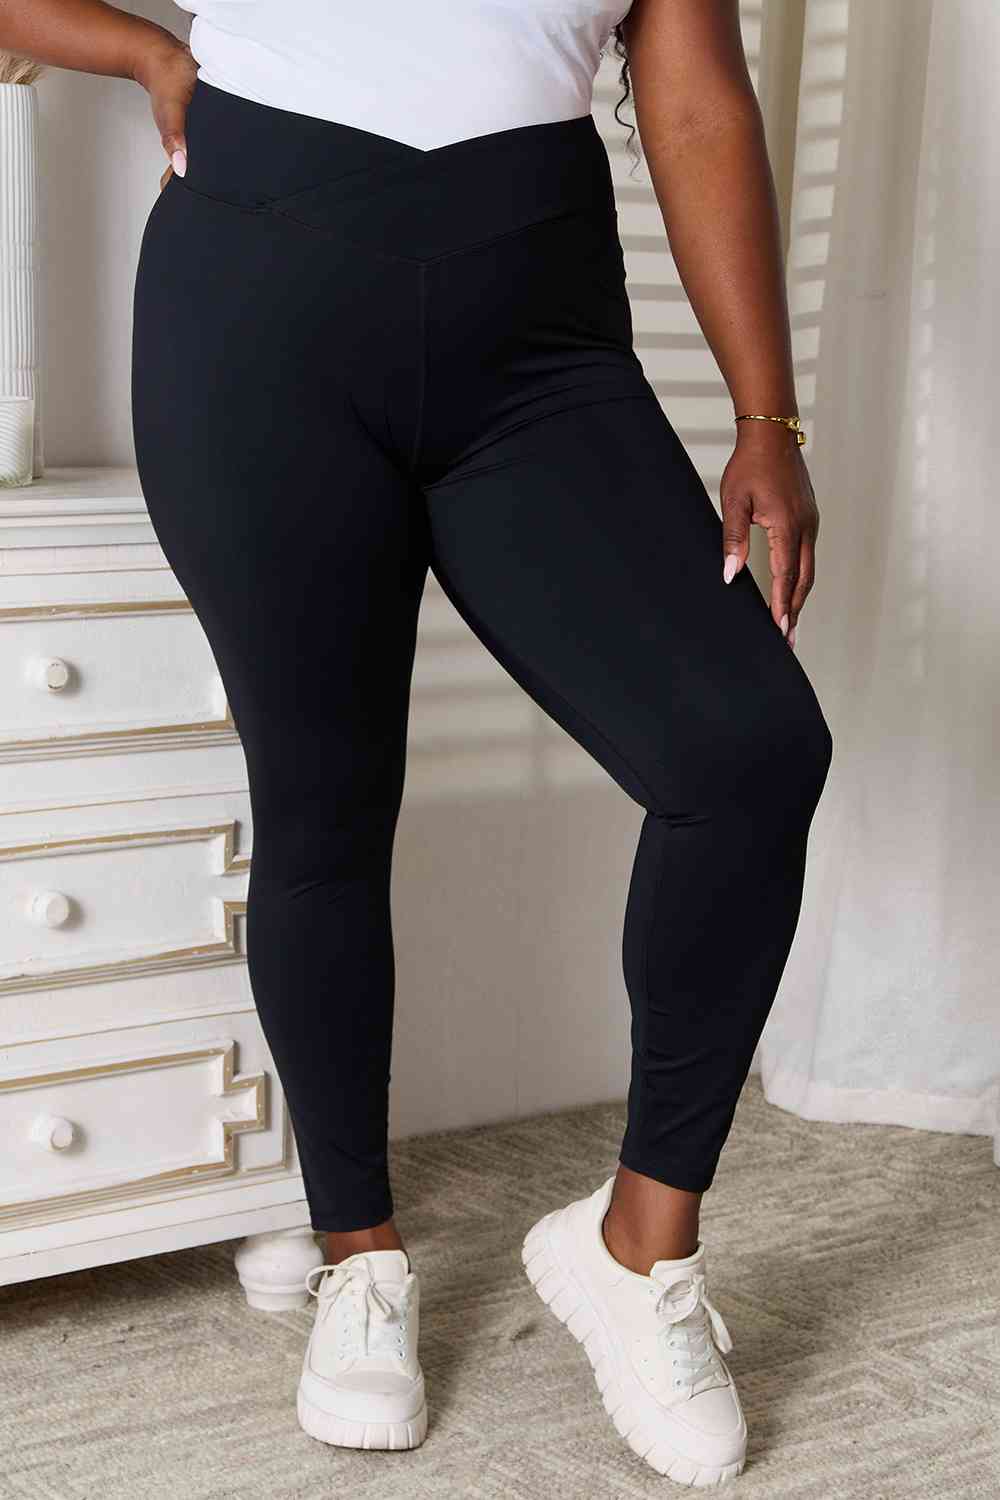 V-Waistband Sports Leggings - All Products - Pants - 5 - 2024